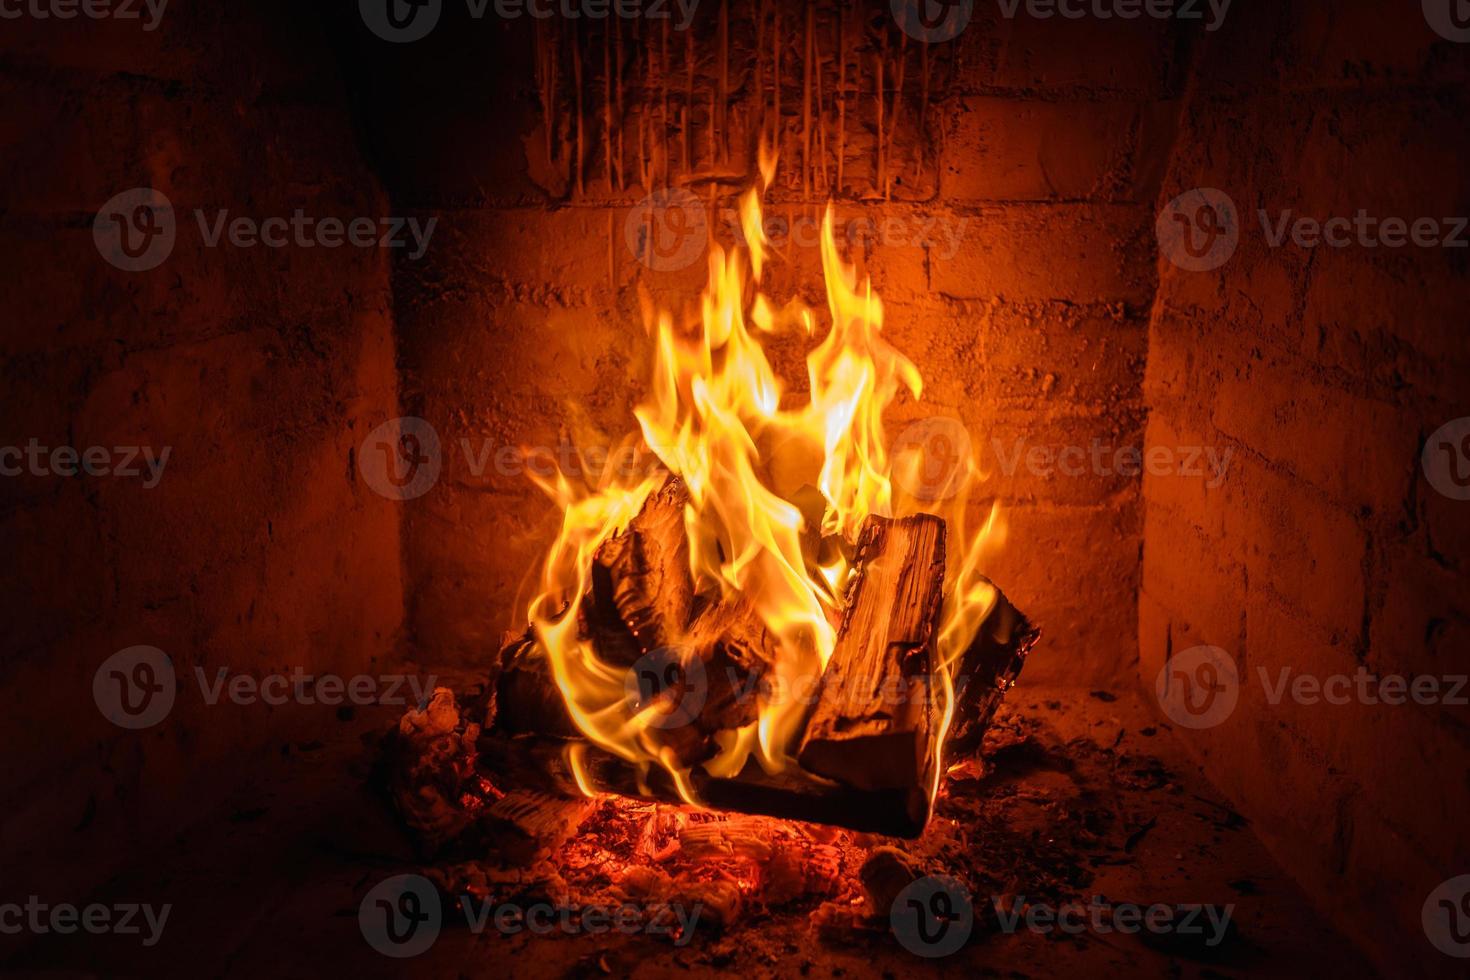 Fire flames in fireplace background photo